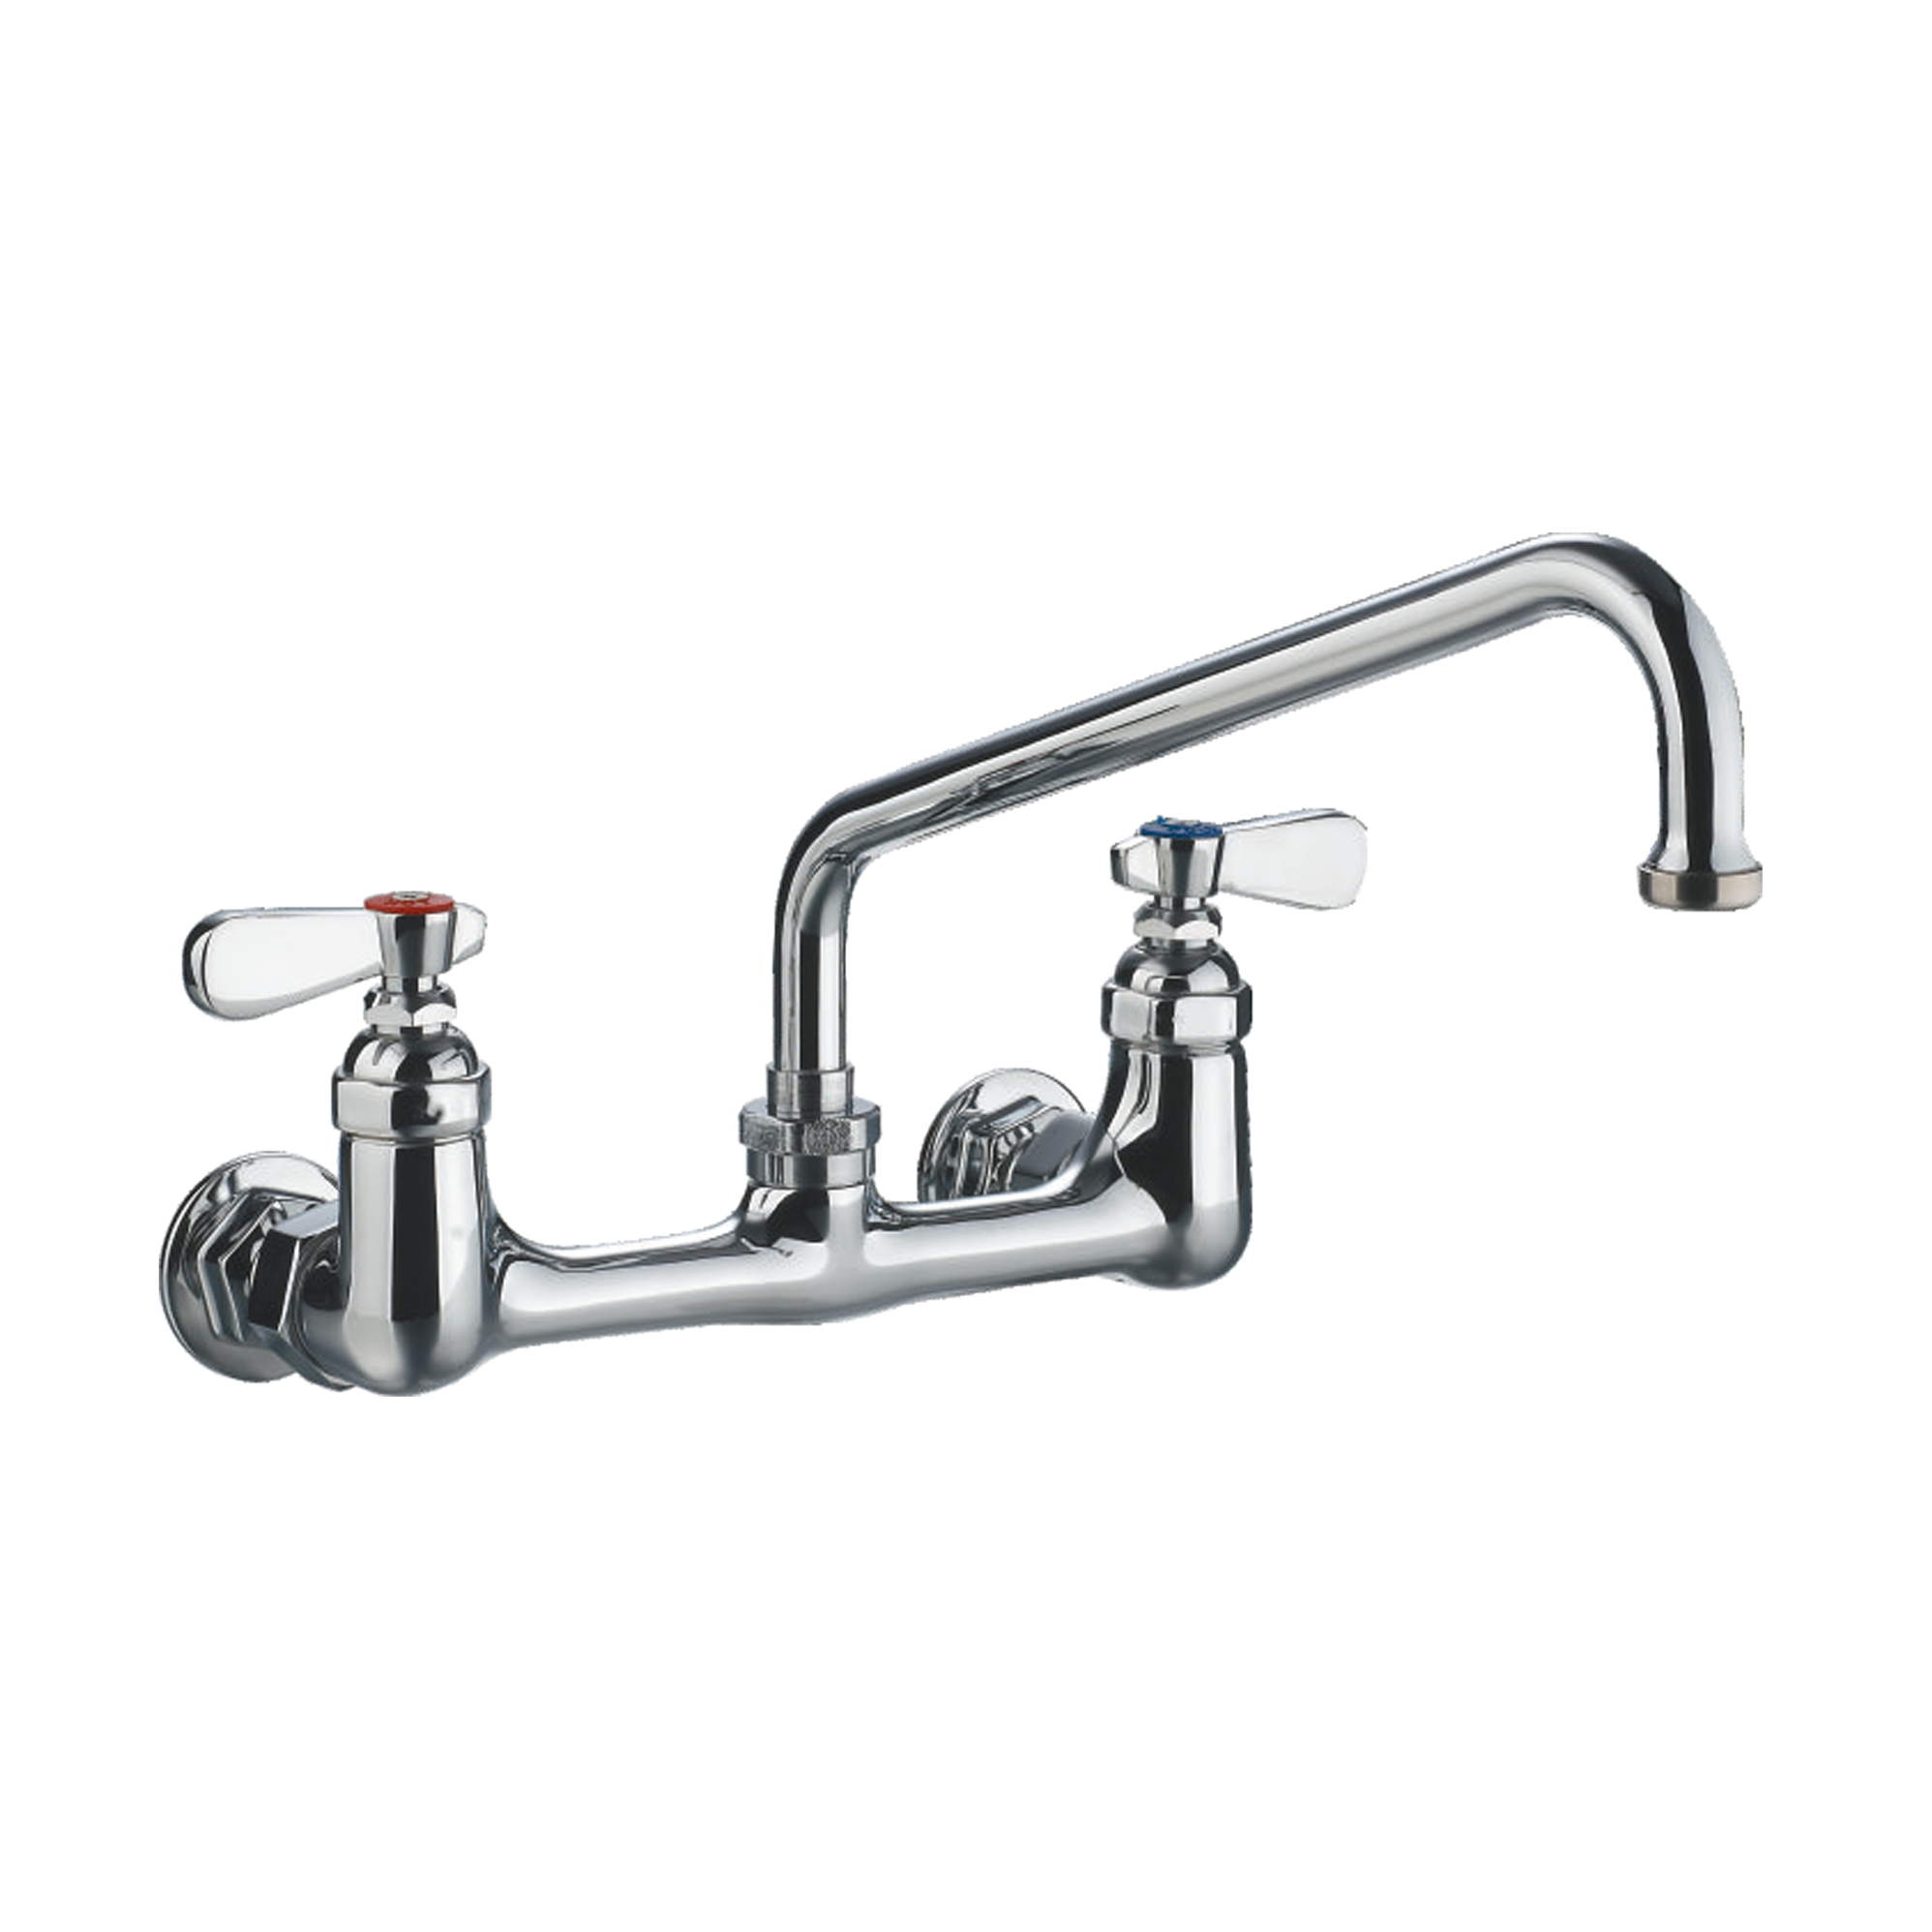 Top-rinse 9814-12 Double Pantry Faucet